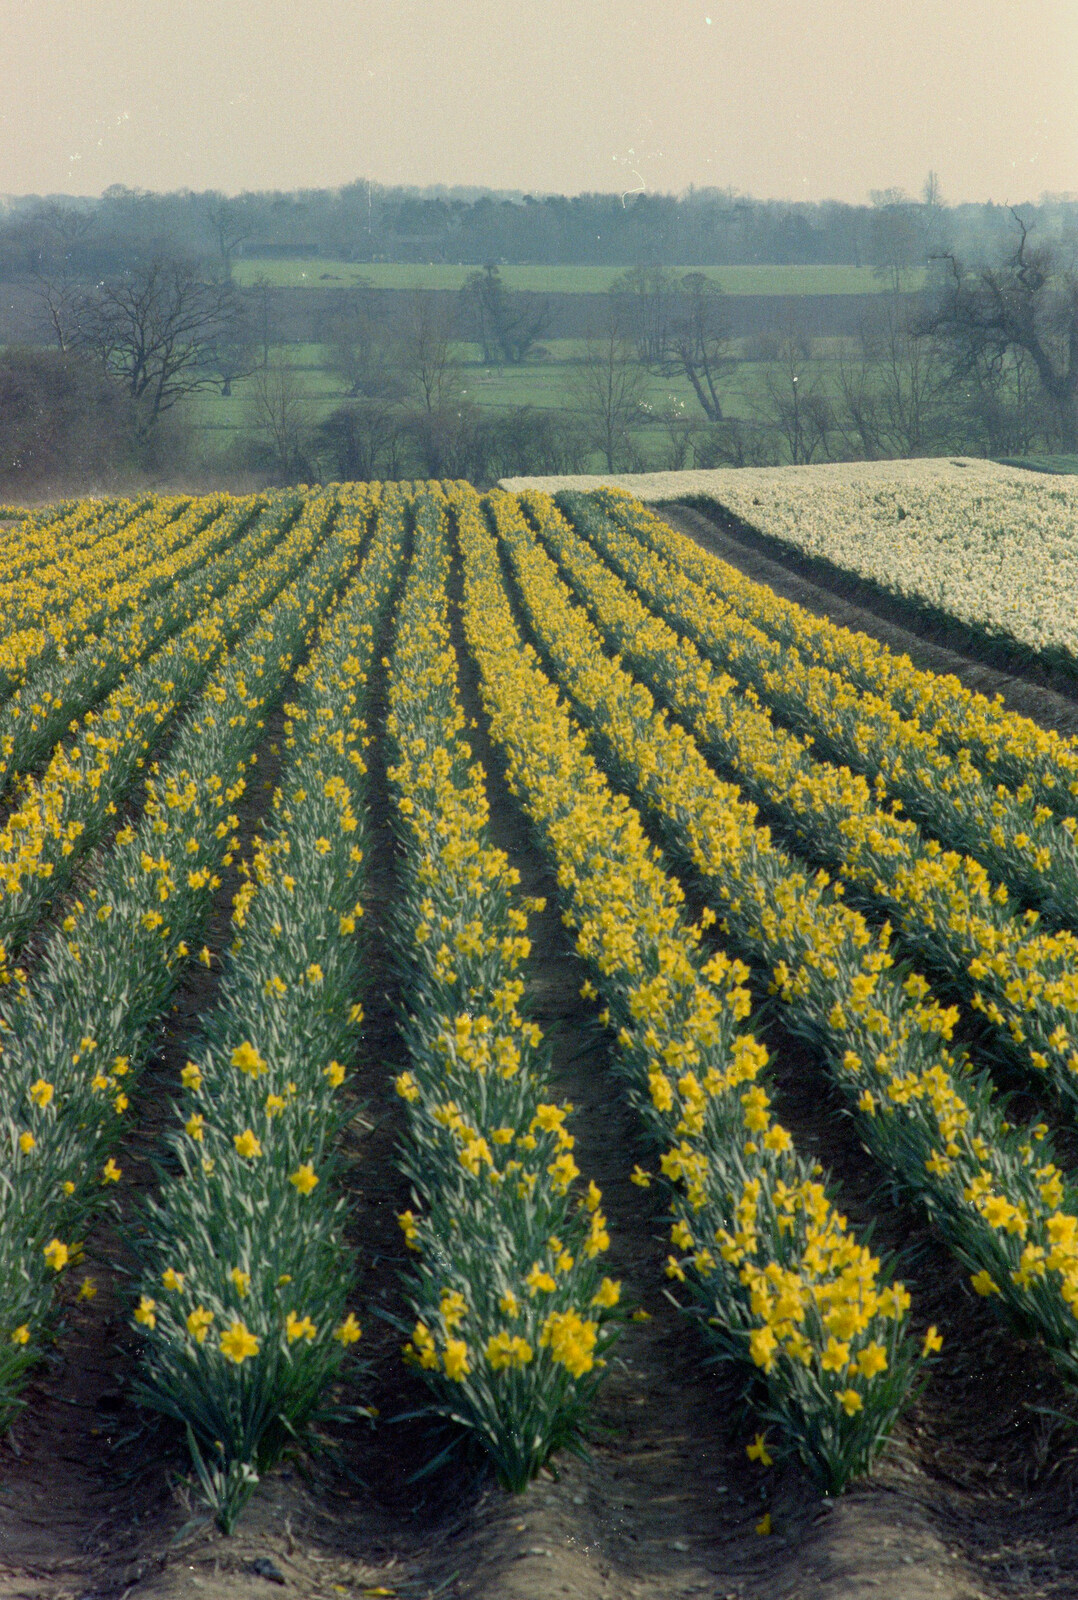 Lines of daffodils from Pedros and Daffodils, Norwich and Billingford, Norfolk - 20th April 1991